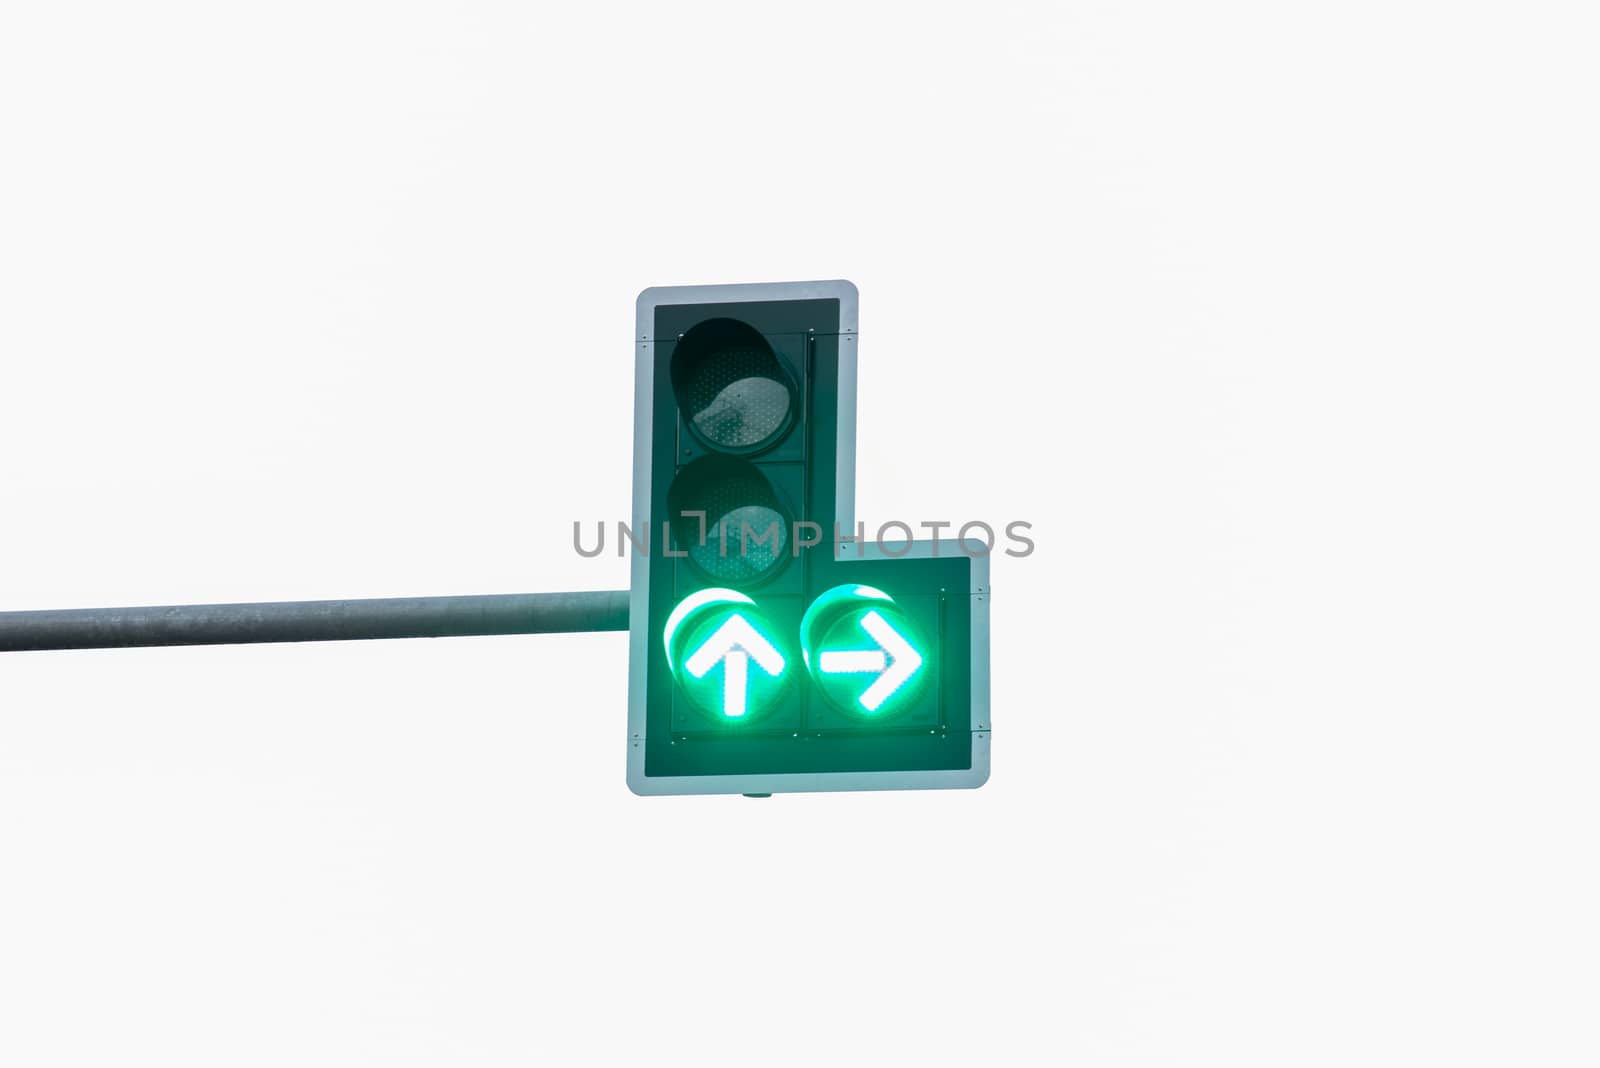 Traffic lights isolated on background